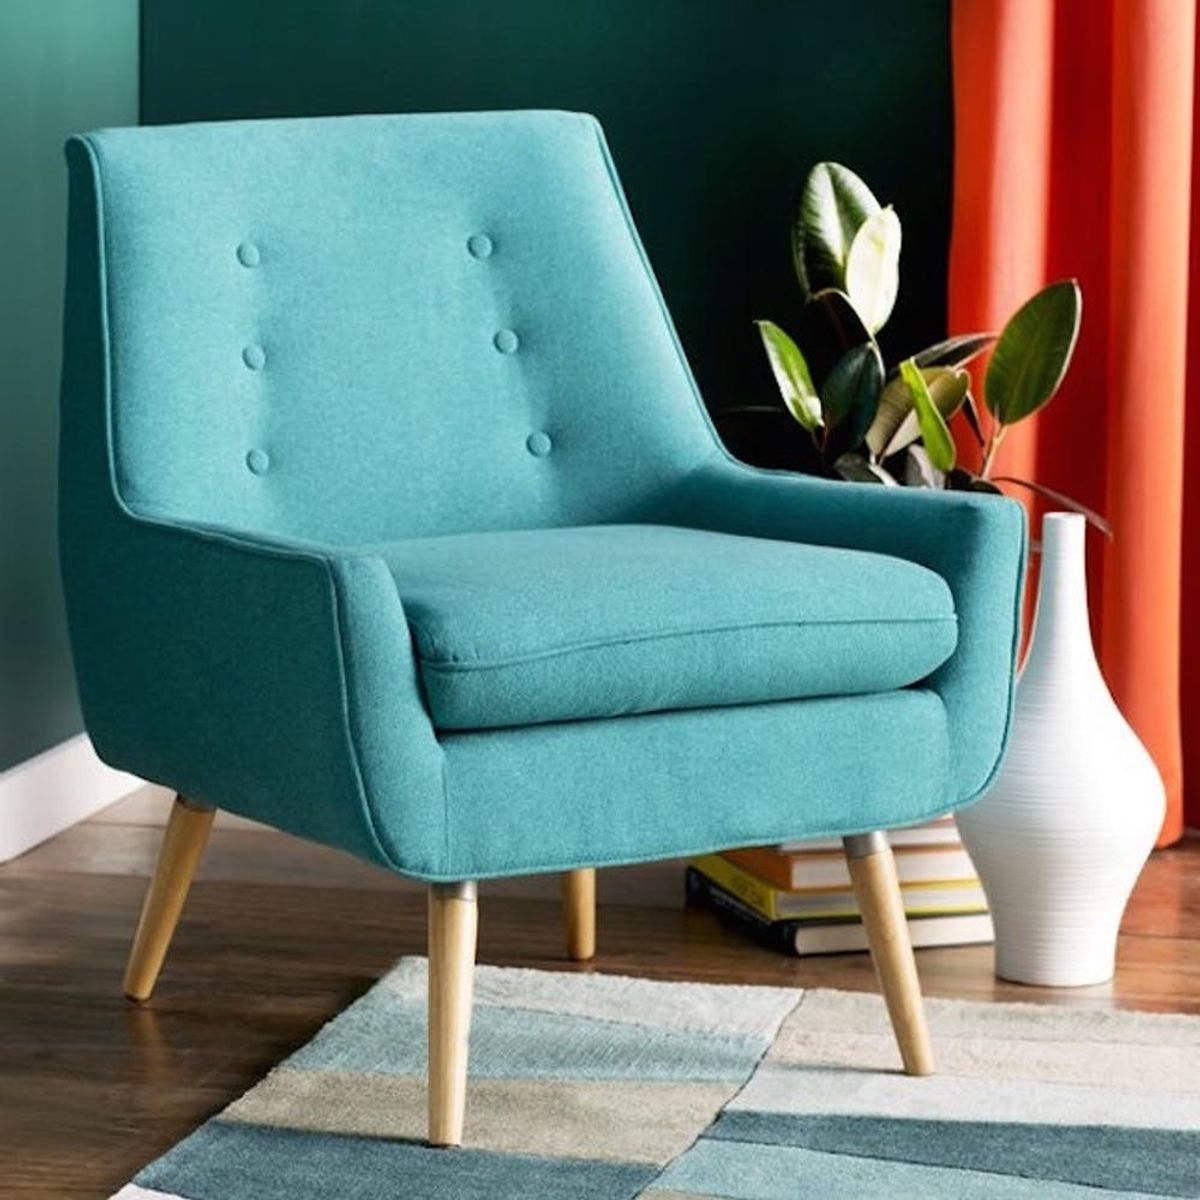 21 Affordable Mid-Century Modern Furniture Finds from Wayfair